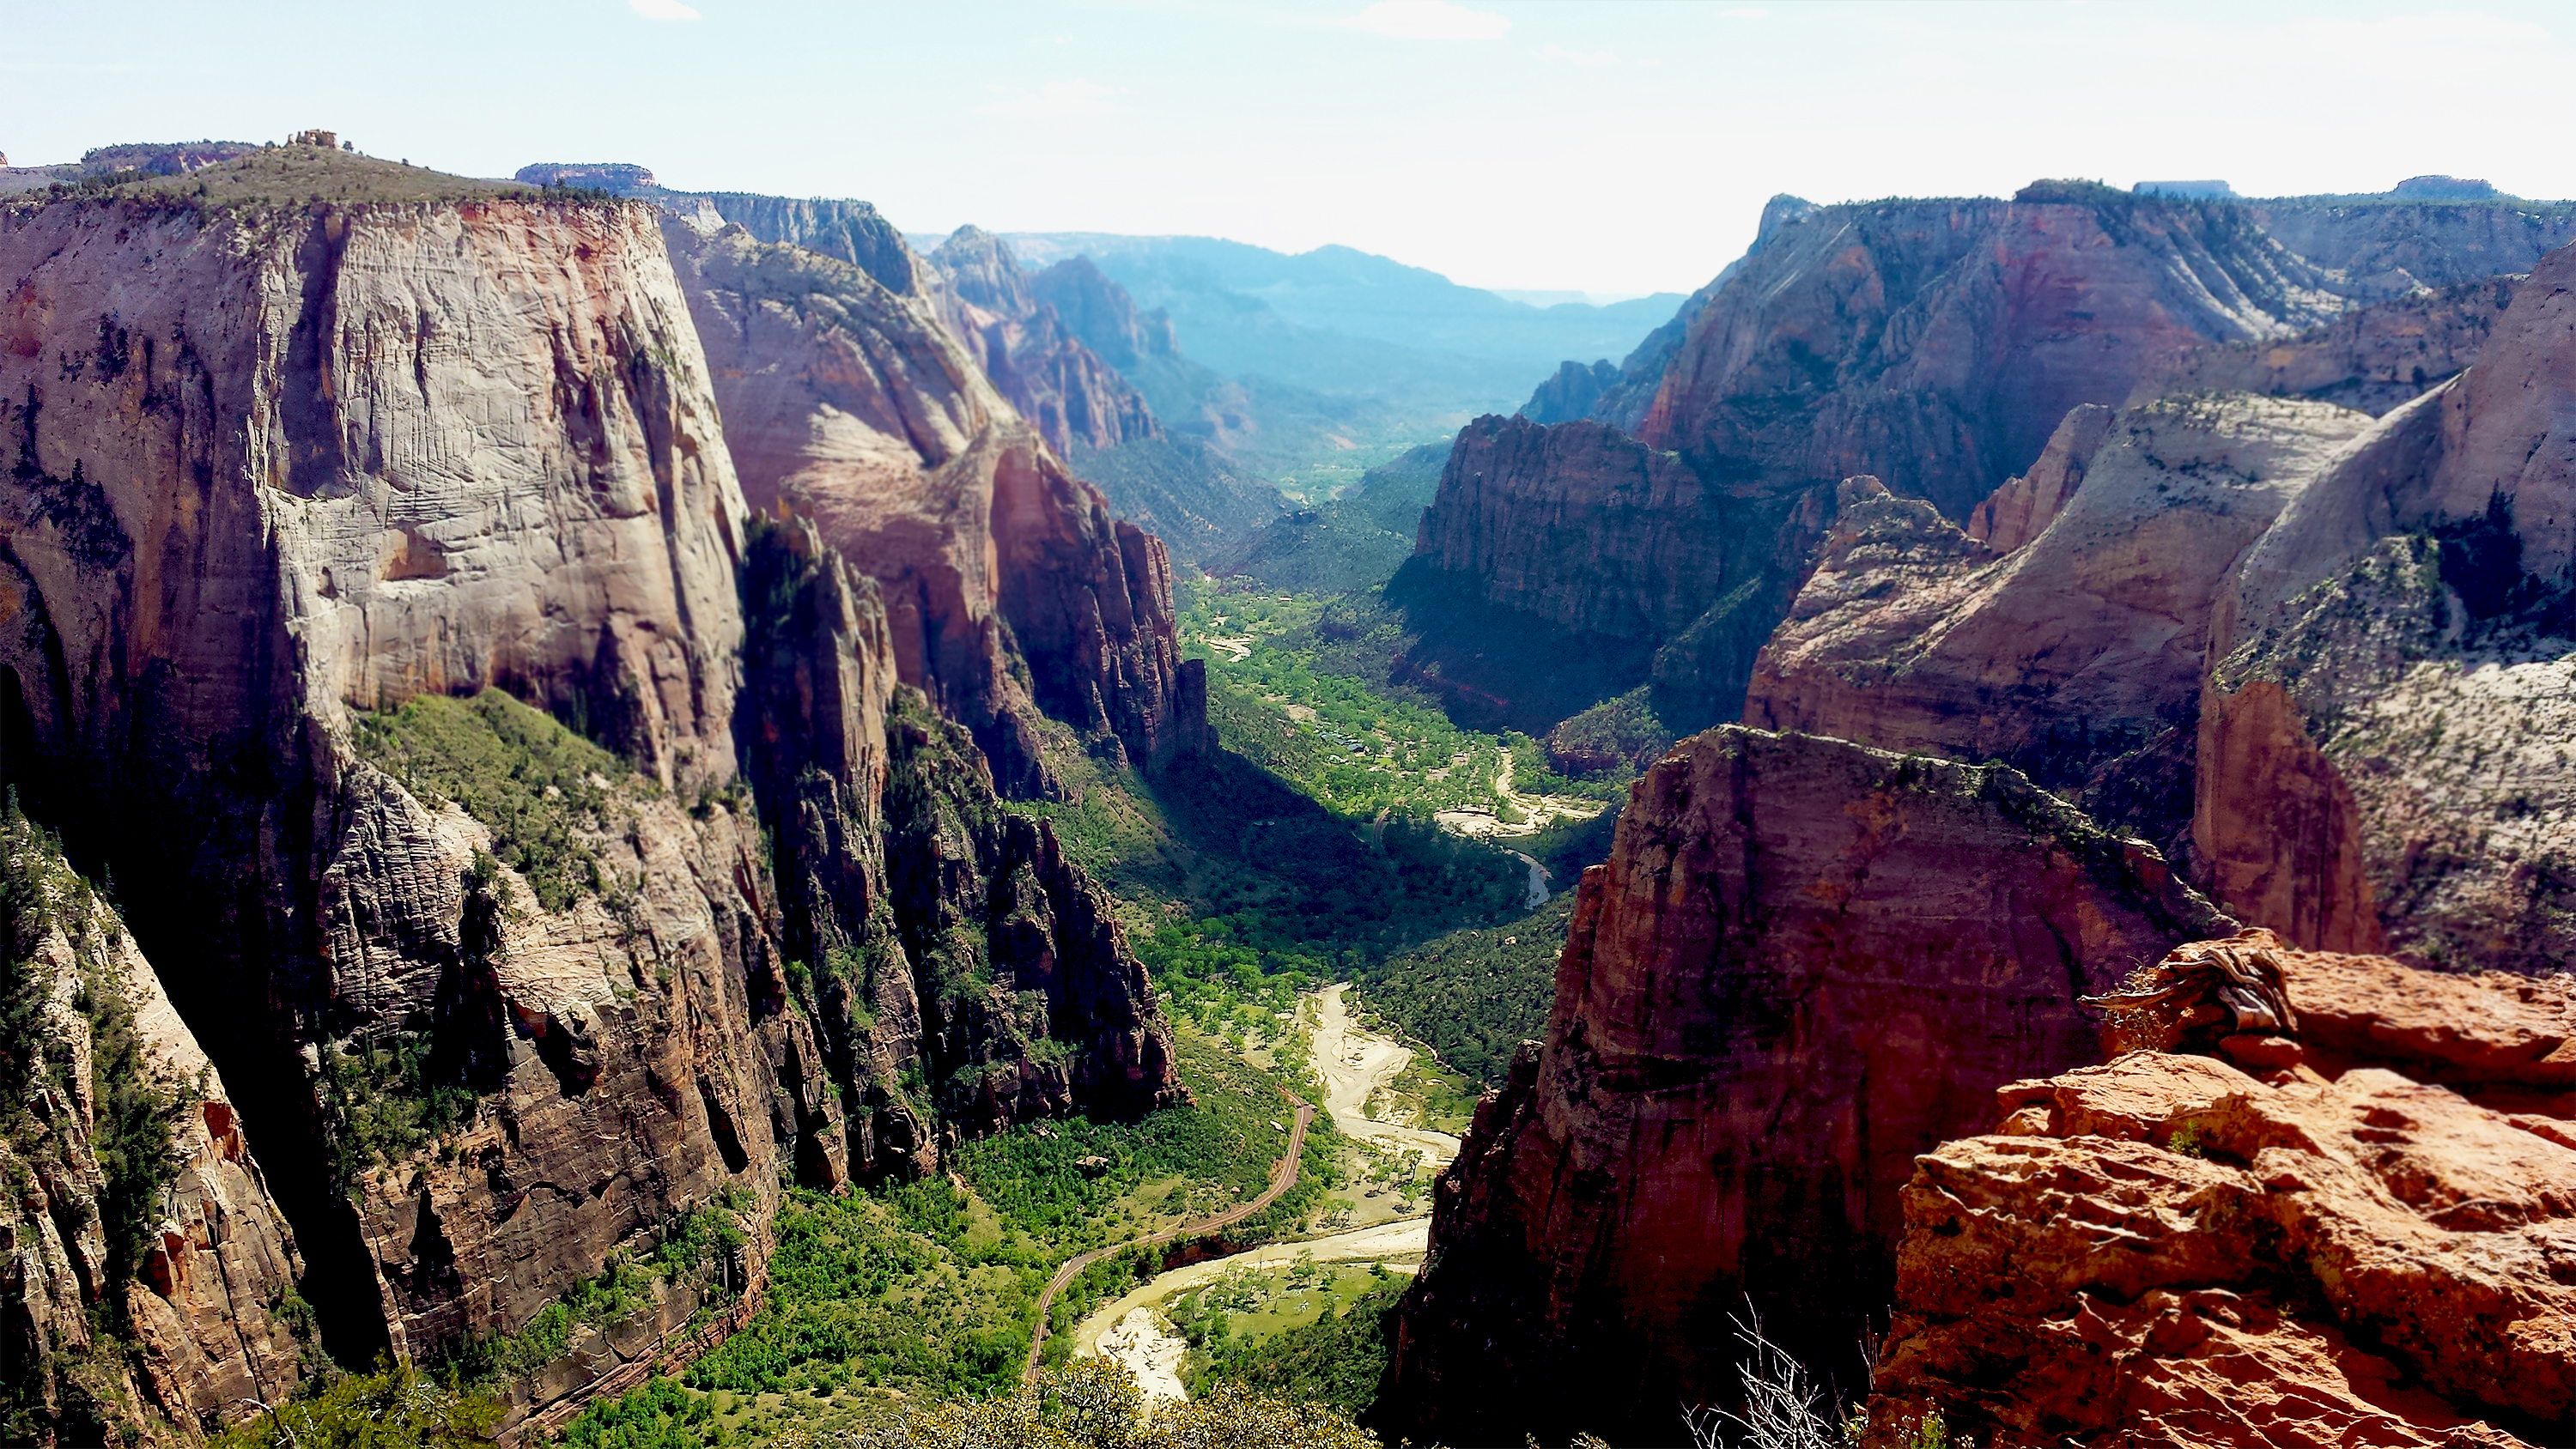 Don’t Miss Hikes in Zion National Park